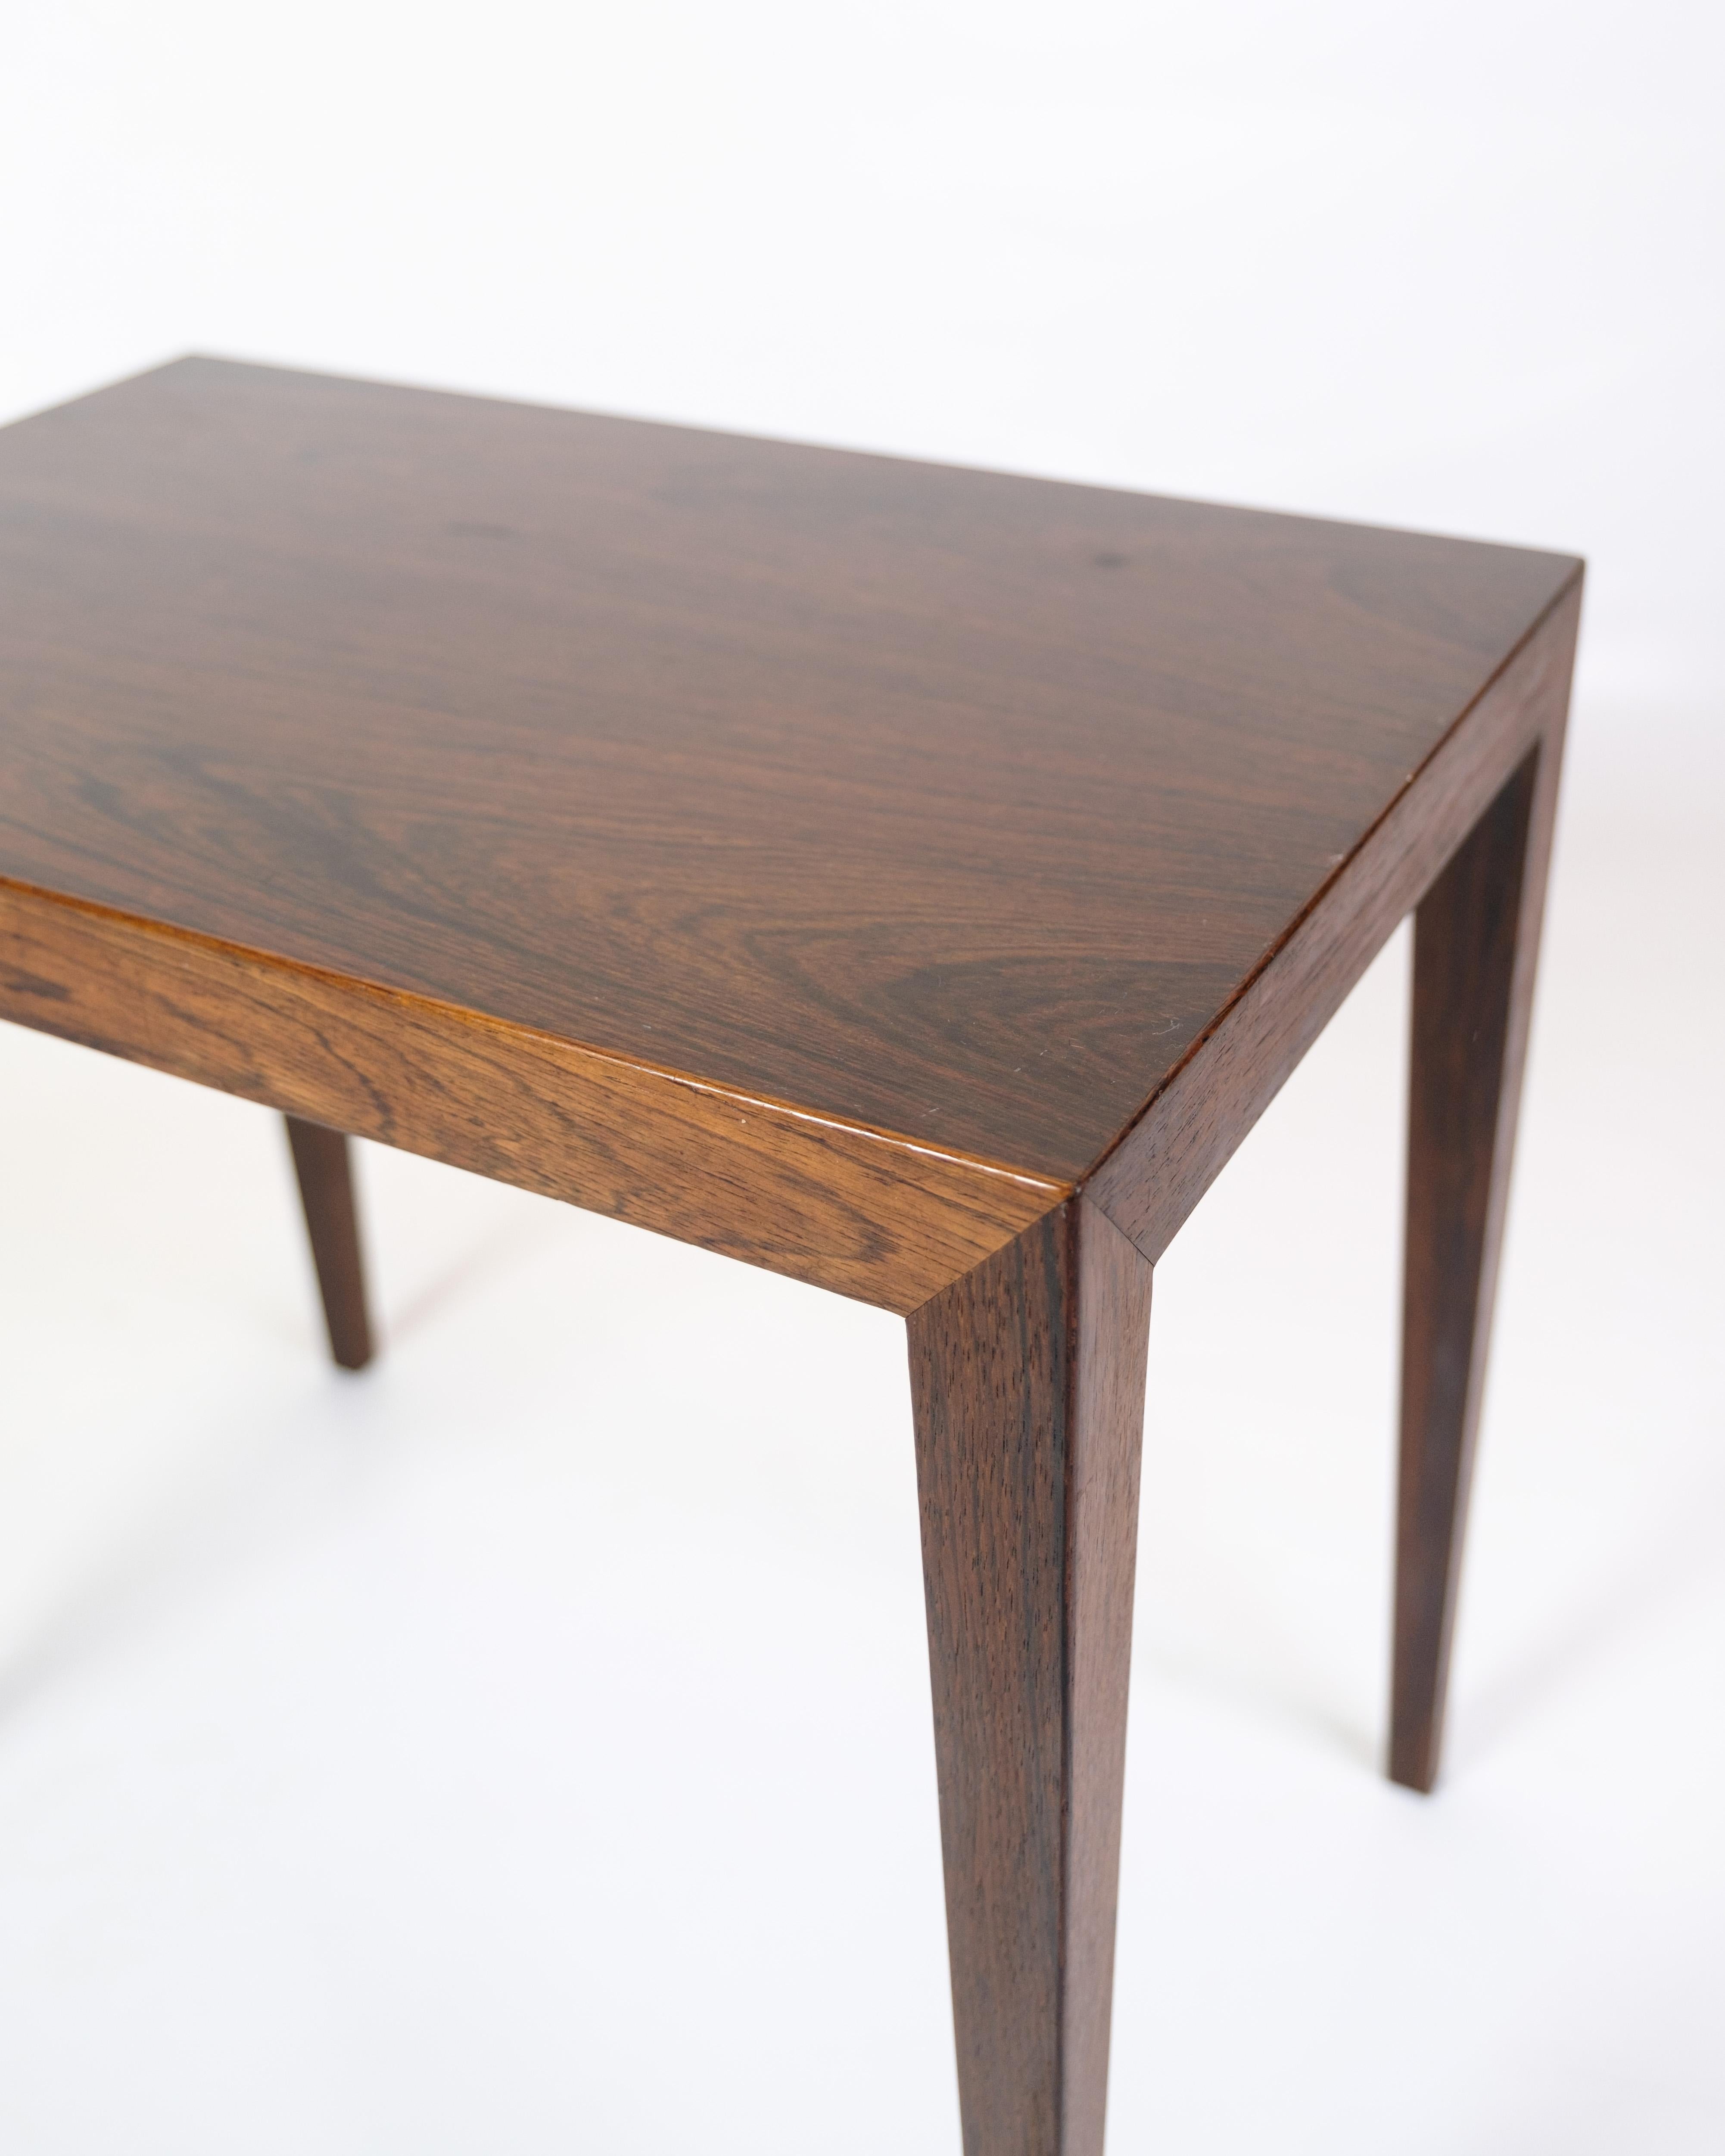 Crafted from beautiful rosewood, these side tables add a warm and sophisticated atmosphere to any living room. They are practical and versatile and can be used as side tables, coffee tables or even as bedside tables.

Severin Hansen was a renowned